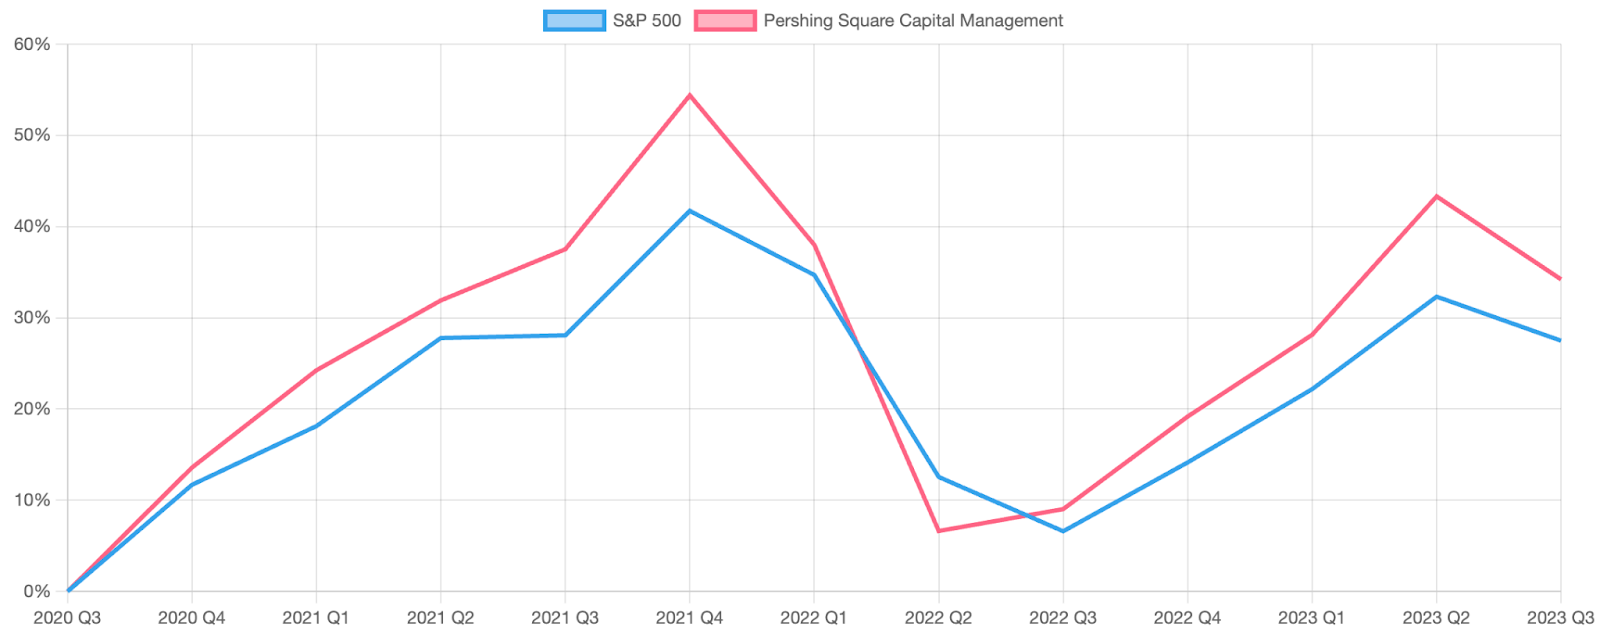 Line graph that plots the performance of the S&P 500 against Pershing Square Capital Management between Q3 2020 and Q3 2023.